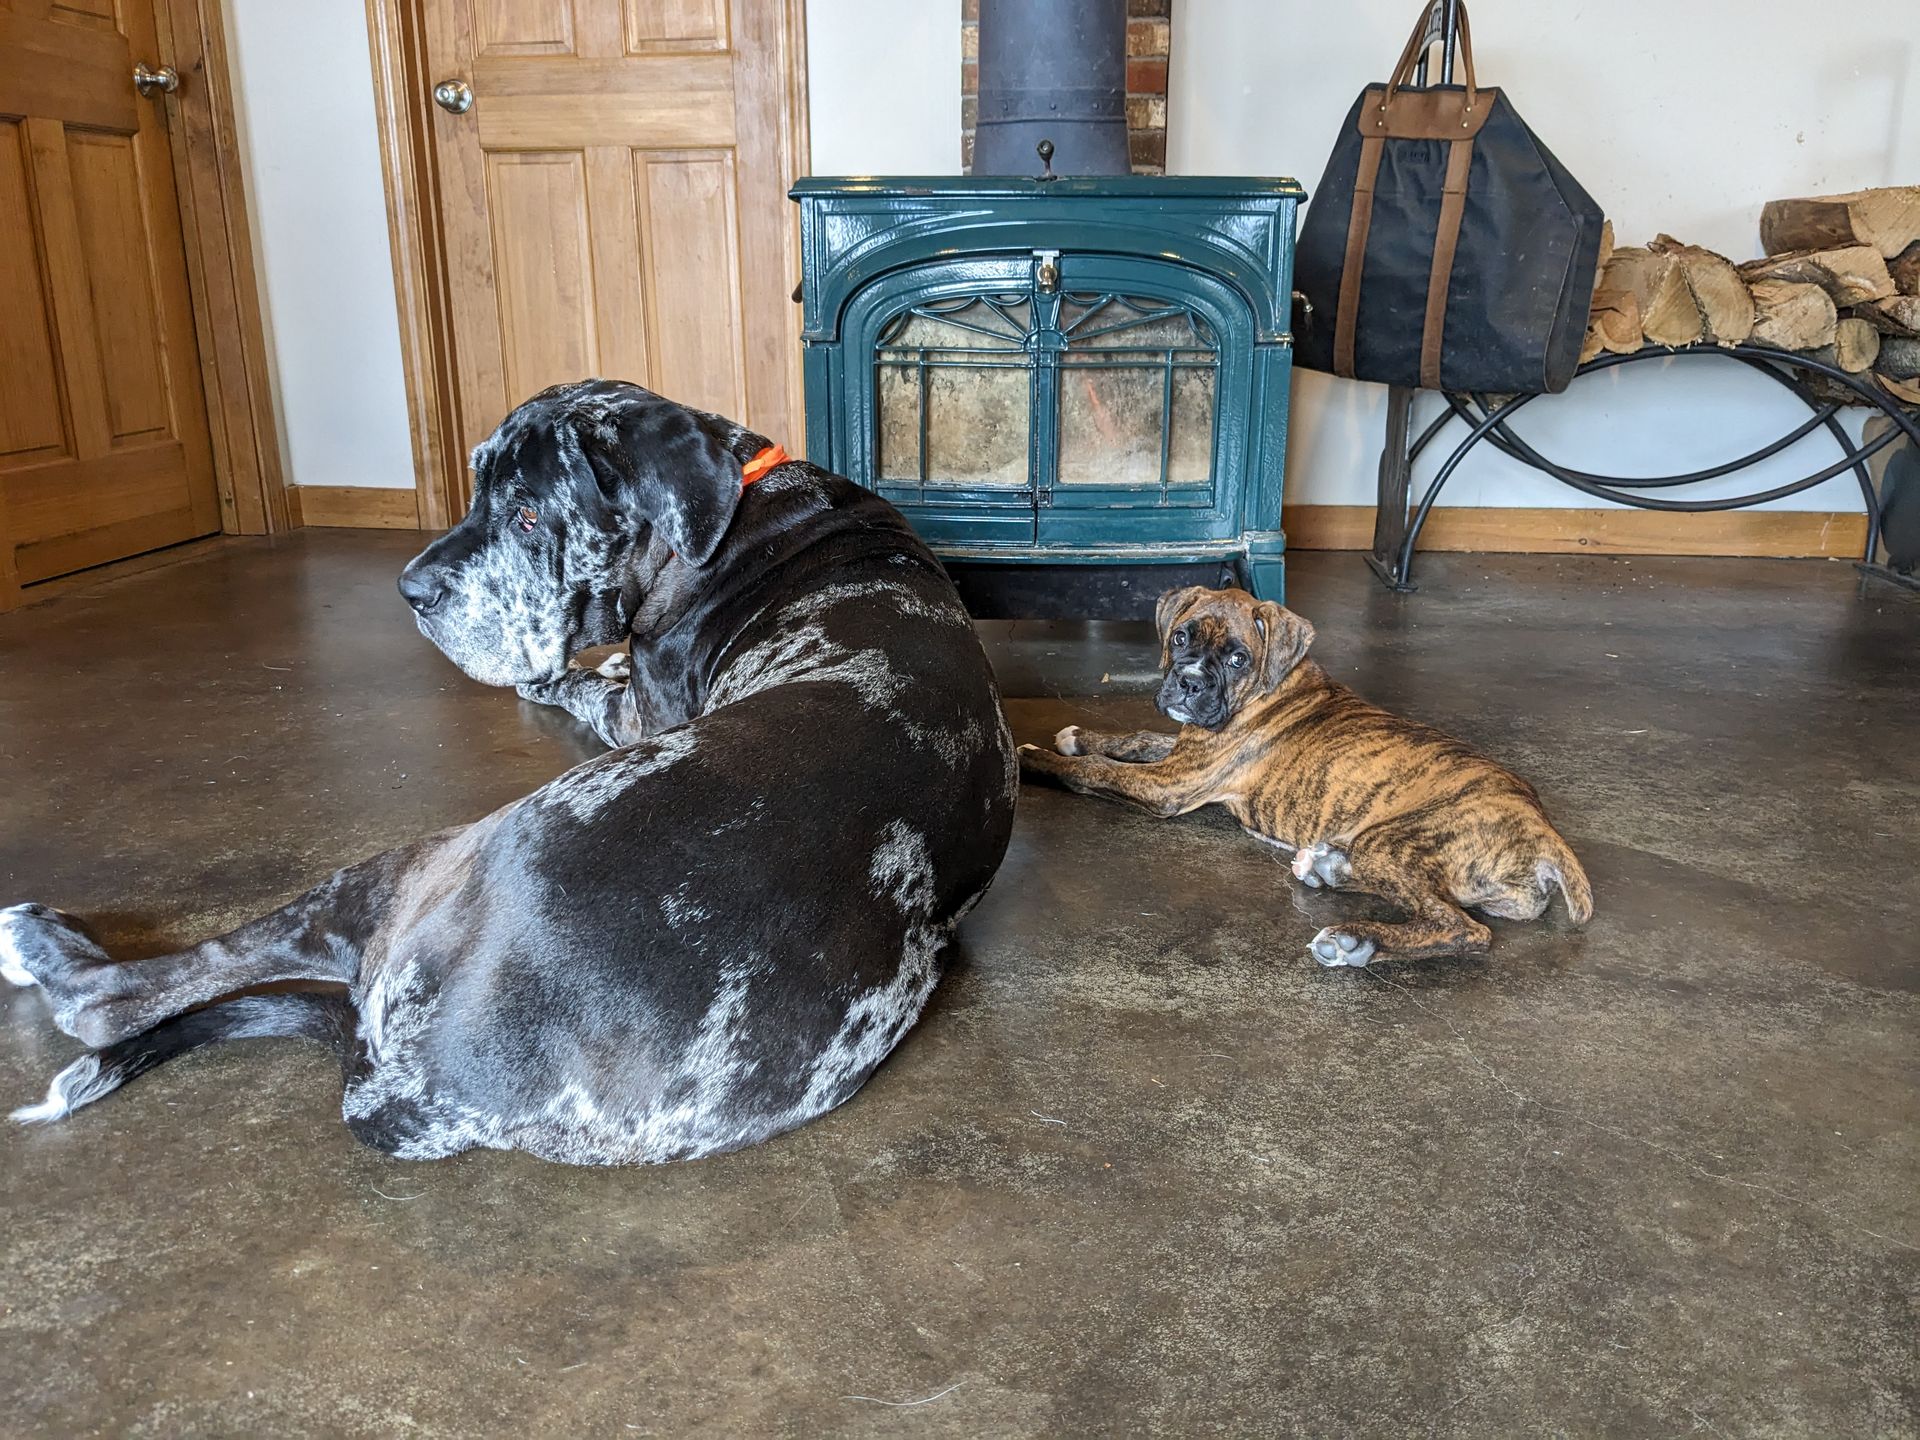 Stryker the difficult Great Dane/English Mastiff and Kiah the brindle Boxer puppy relaxing by a wood stove.